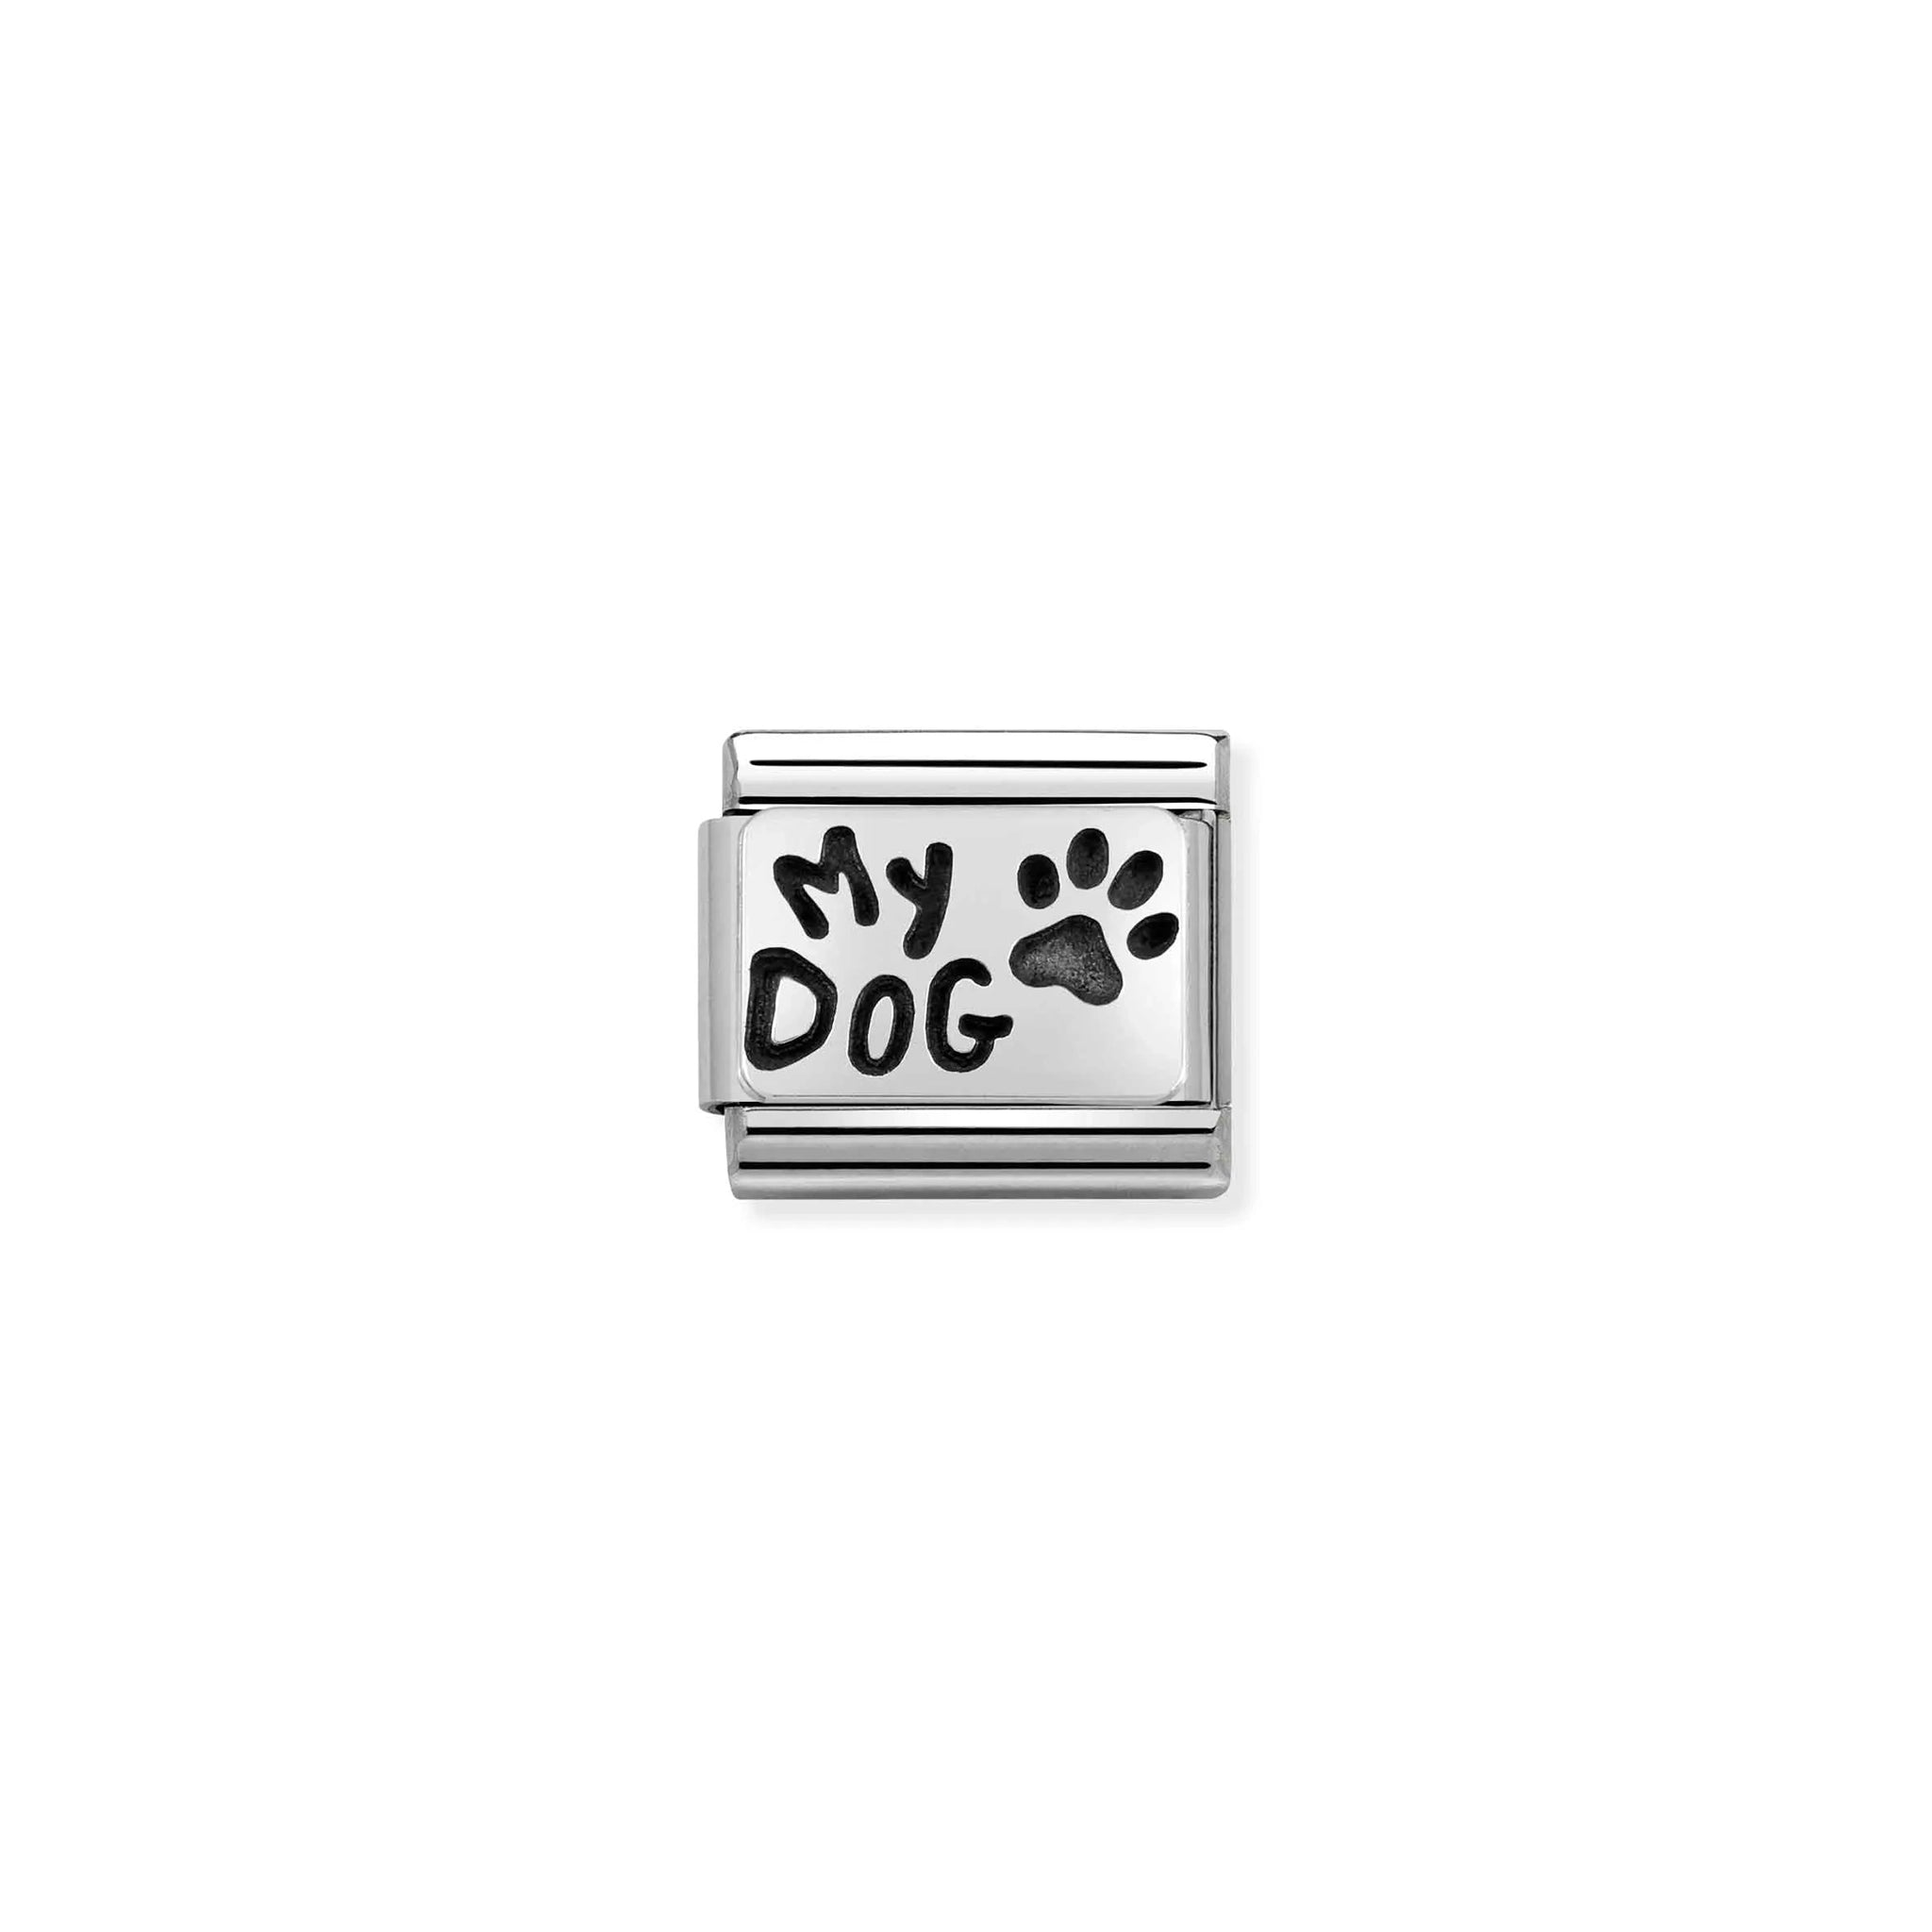 Nomination charm featuring a silver plaque with 'My Dog' in black enamel and a paw print